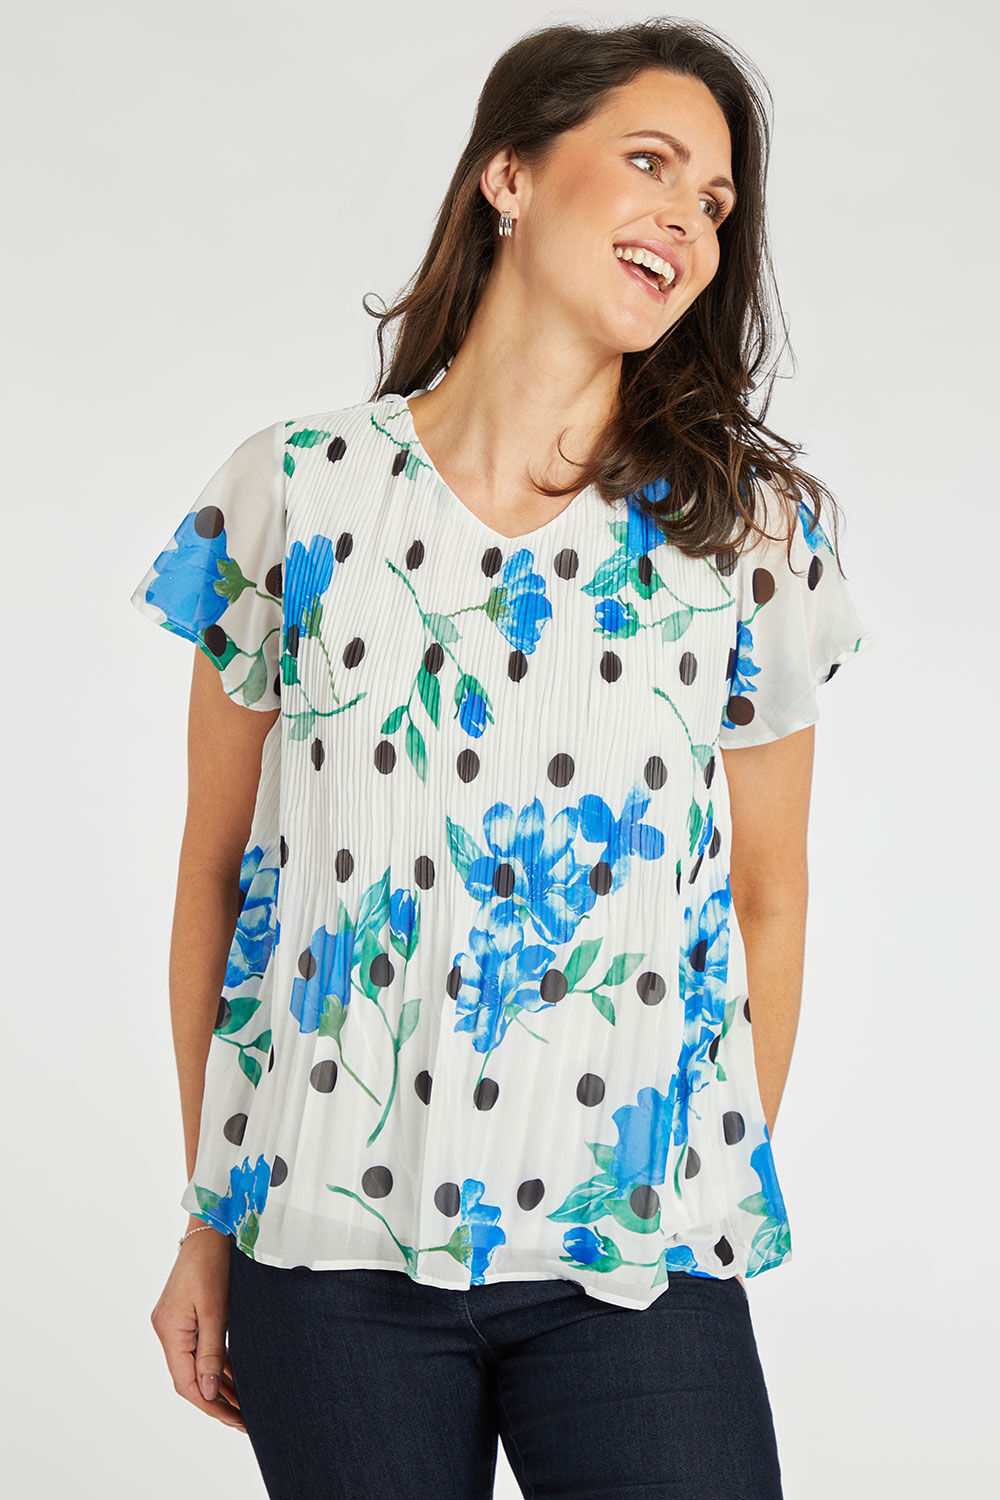 Bonmarche Blue Flower and Sport Printed Pleated Chiffon Top, Size: 1